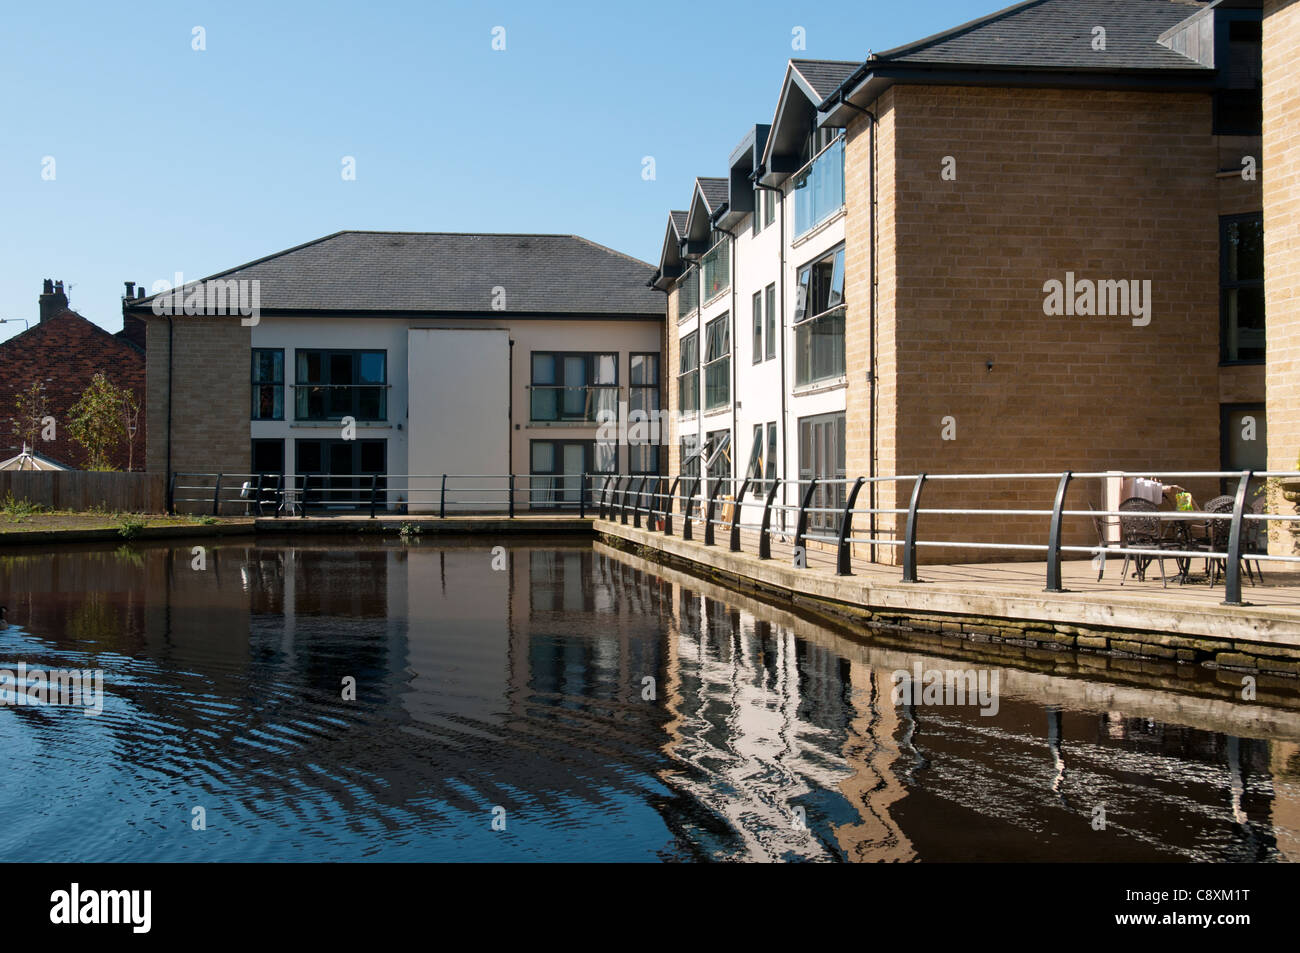 Apartments by the side of the Huddersfield Canal, Stalybridge, Tameside, Manchester, England, UK Stock Photo